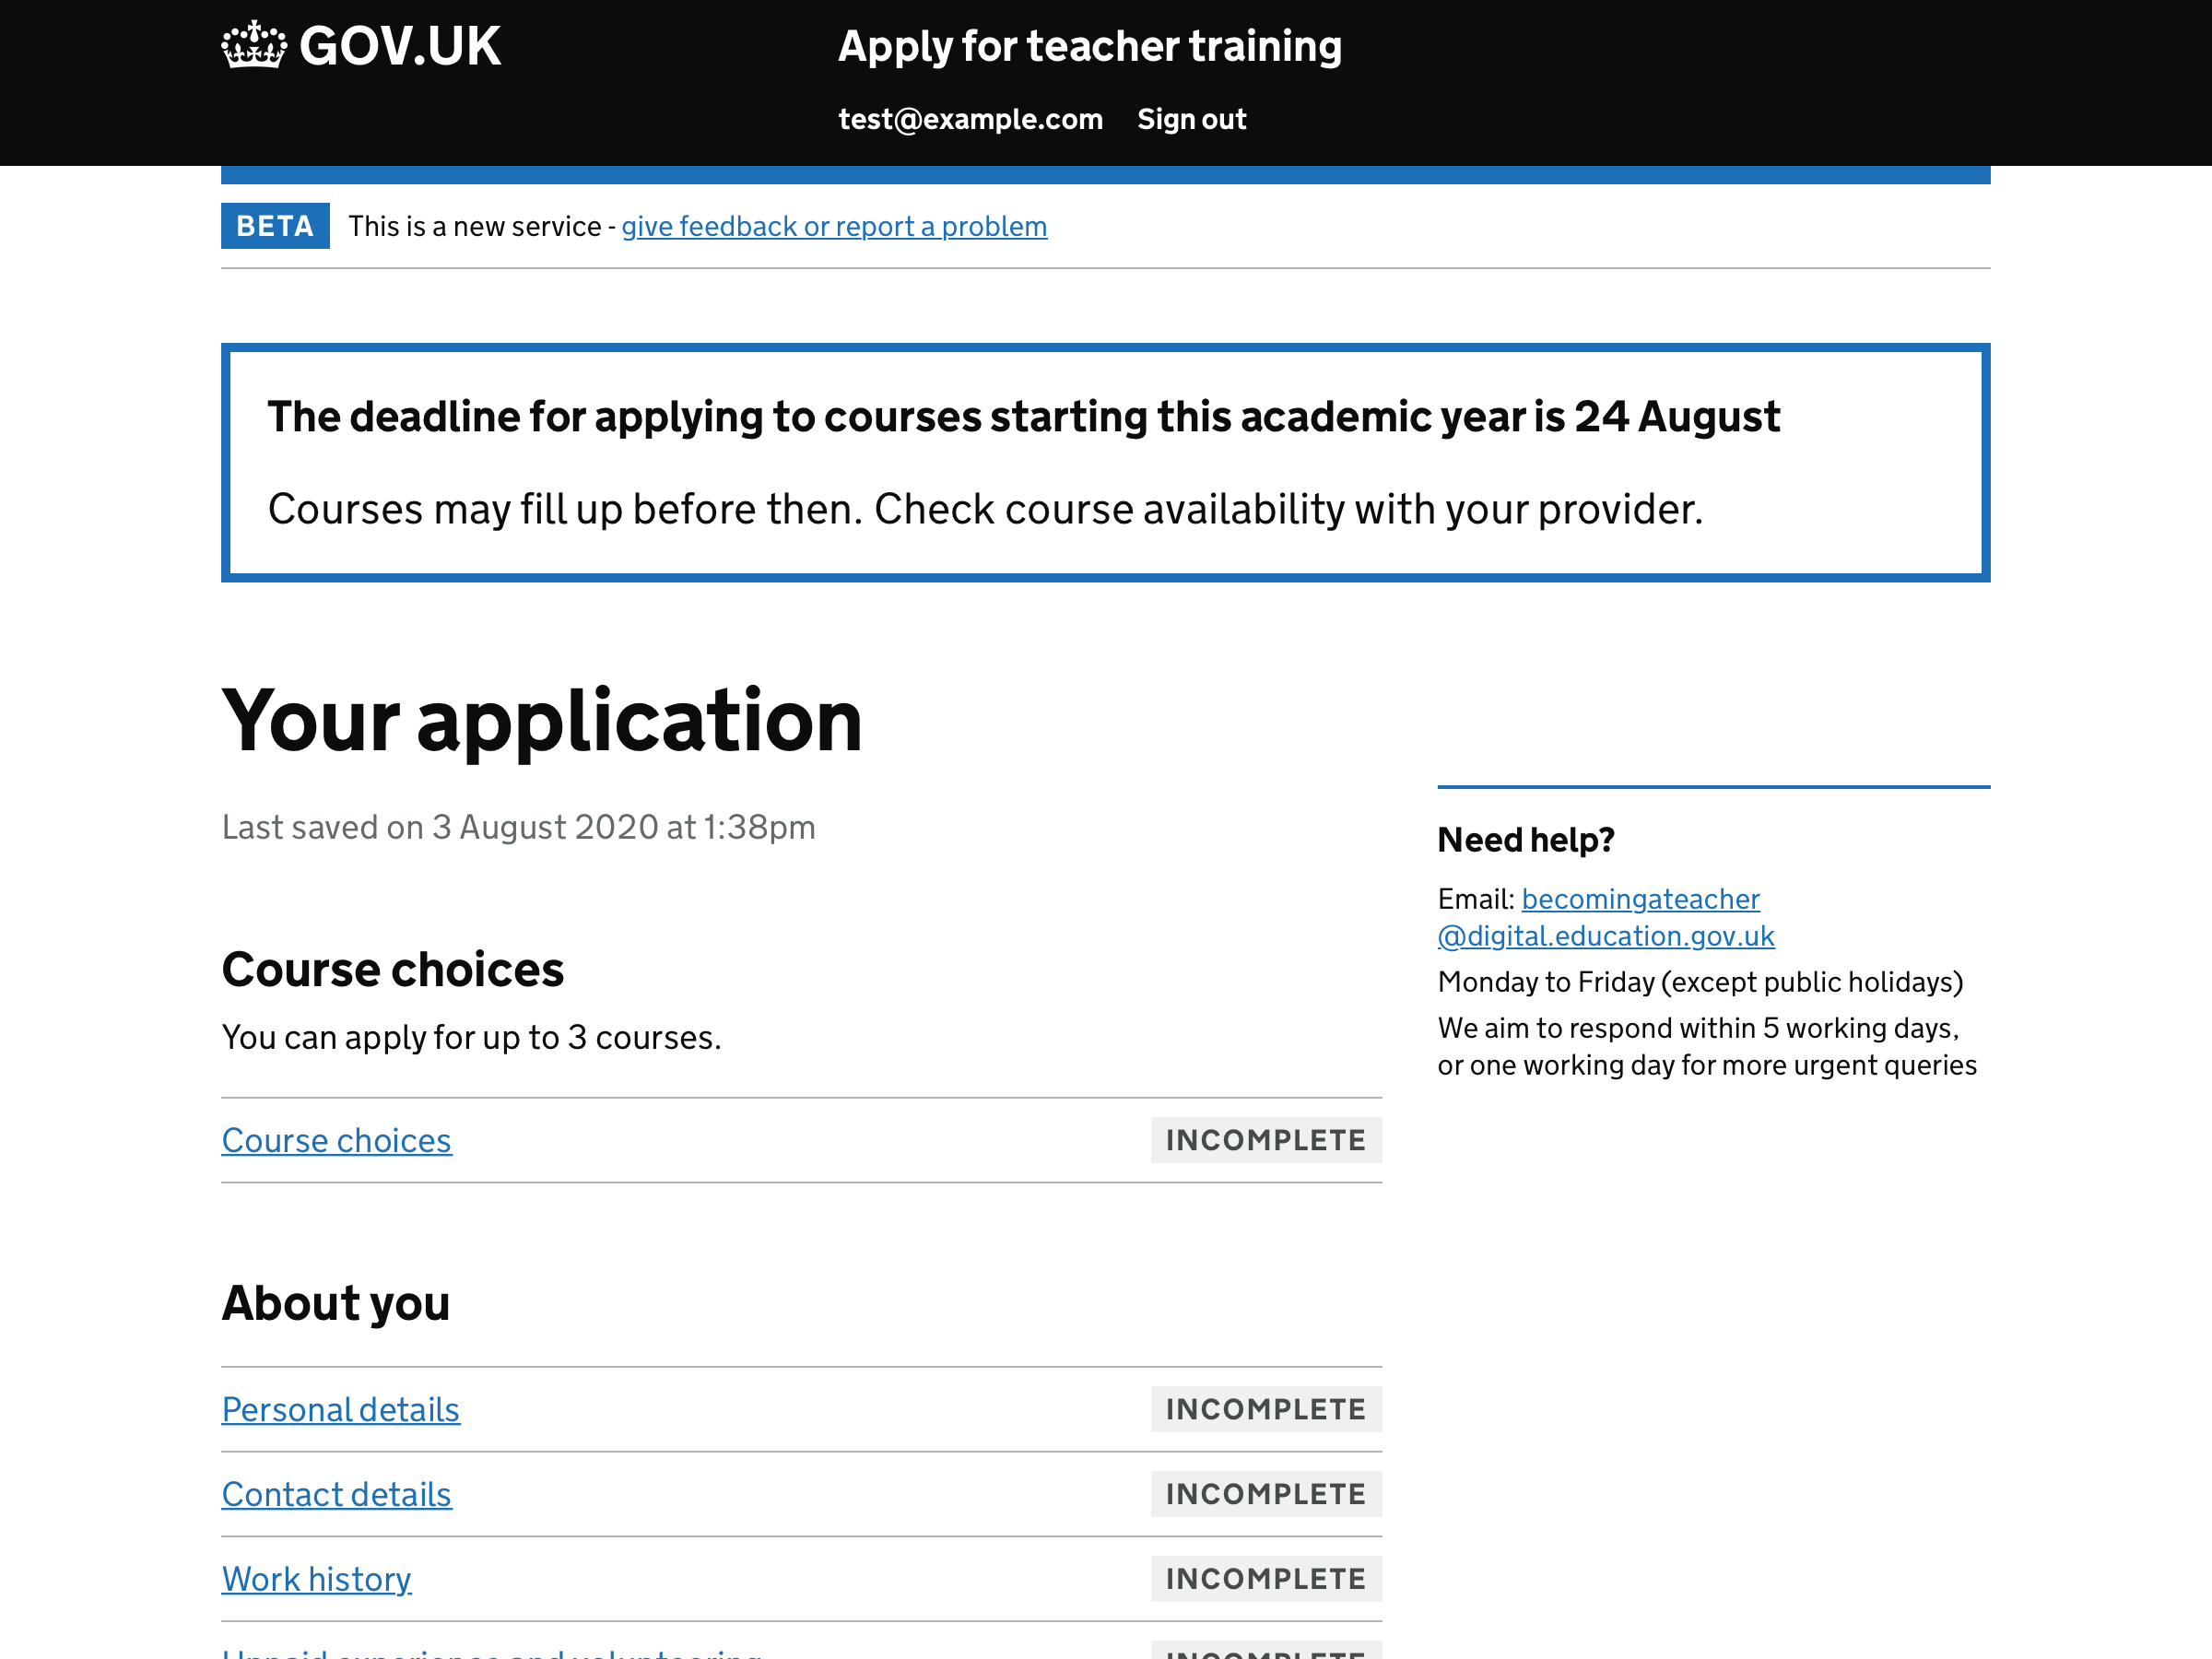 First deadline banner on application page.